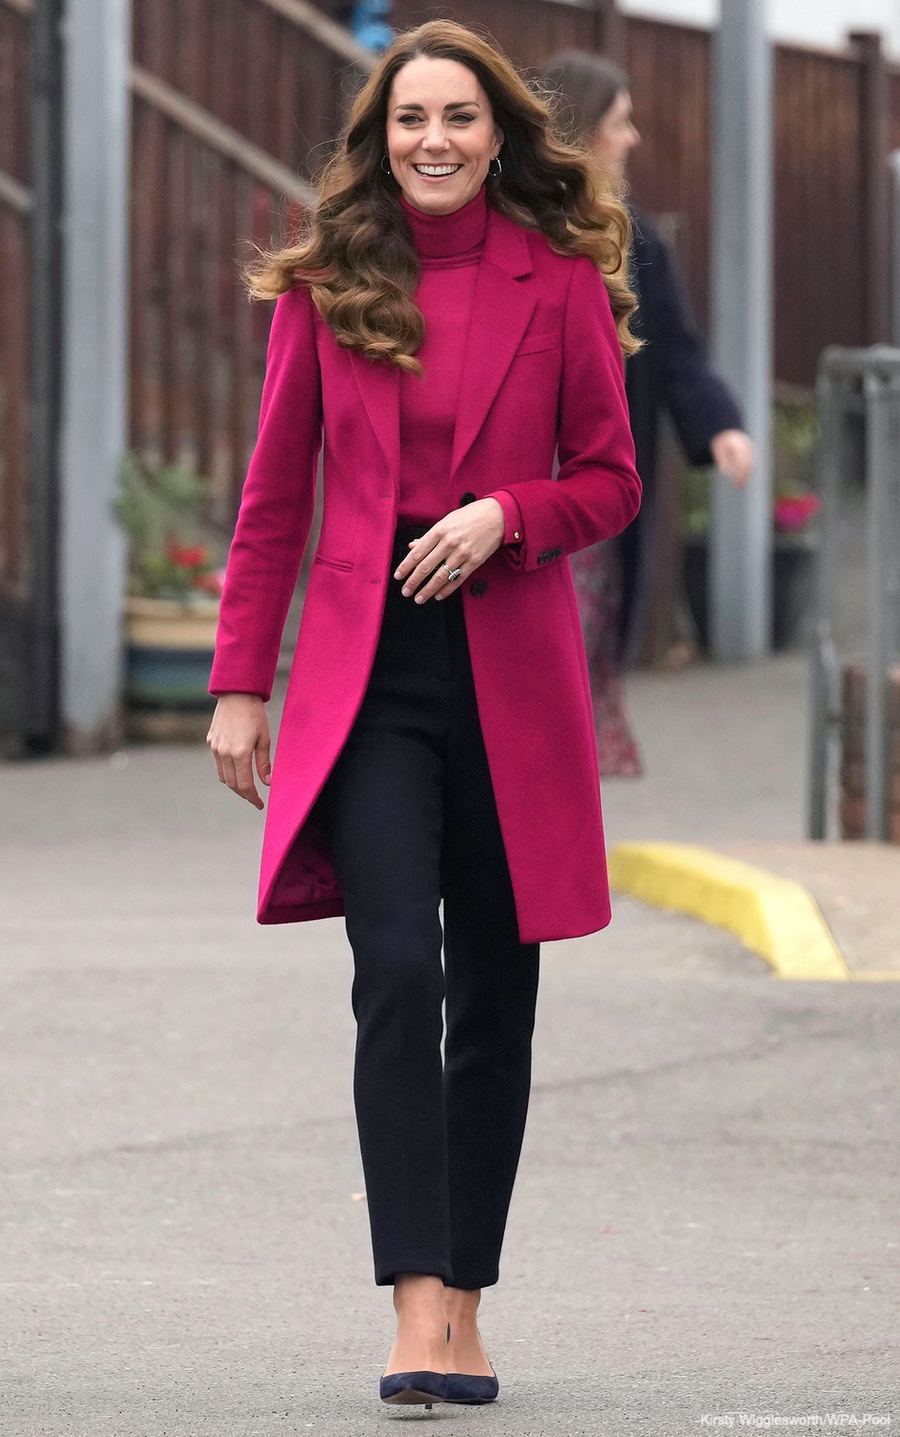 Kate Middleton dresses for autumn in a tonal berry pink coat and sweater with trousers.